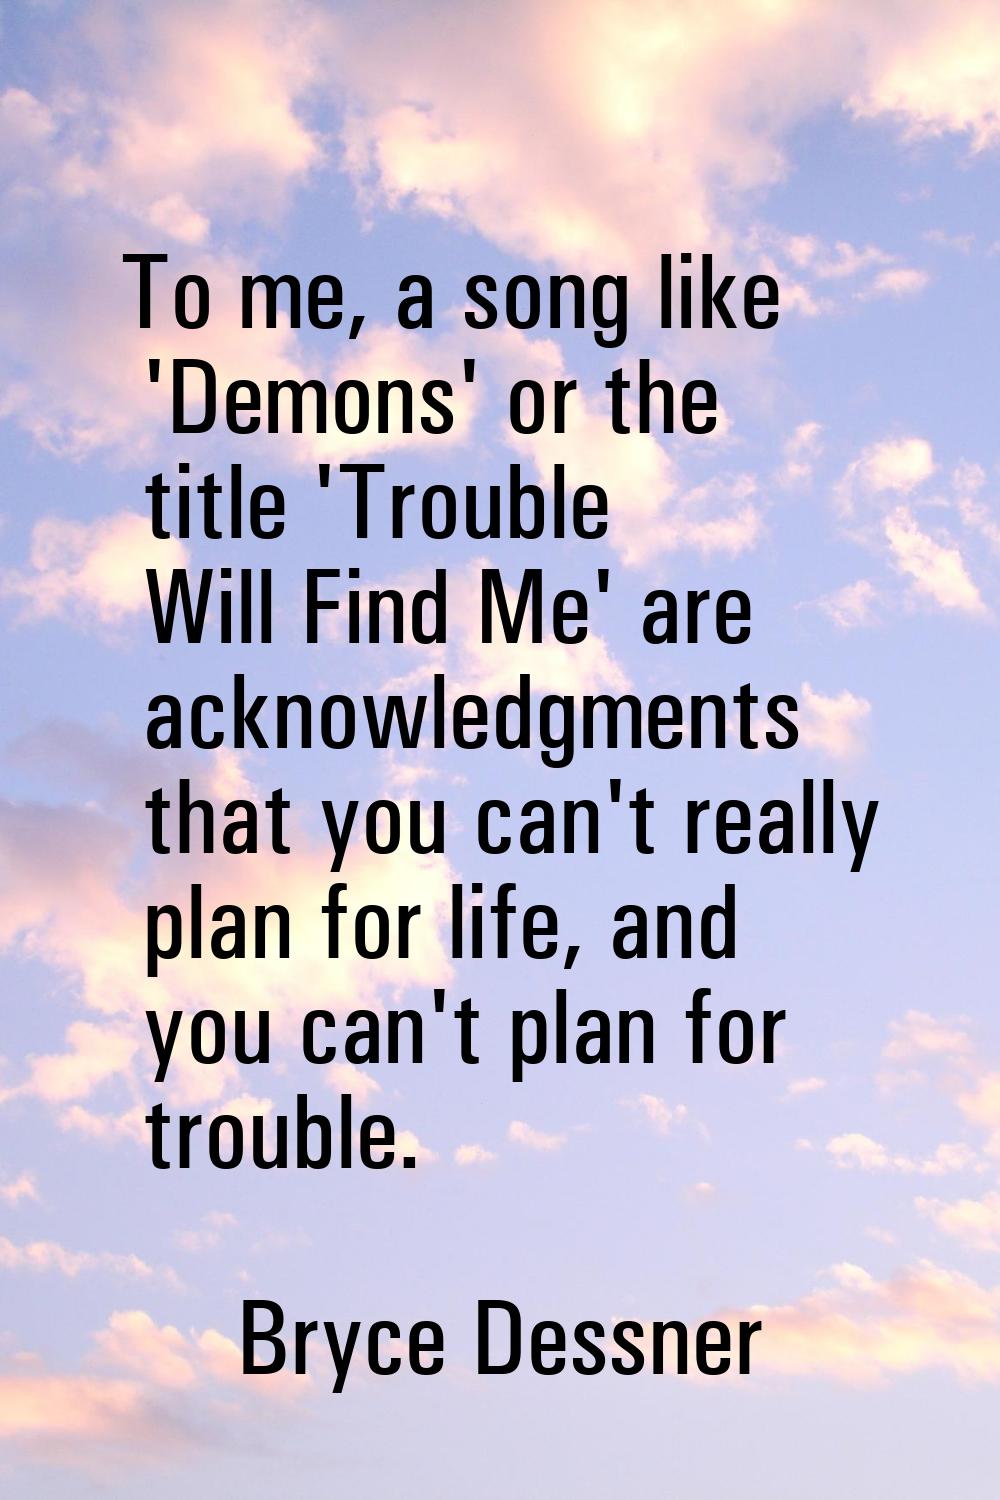 To me, a song like 'Demons' or the title 'Trouble Will Find Me' are acknowledgments that you can't 